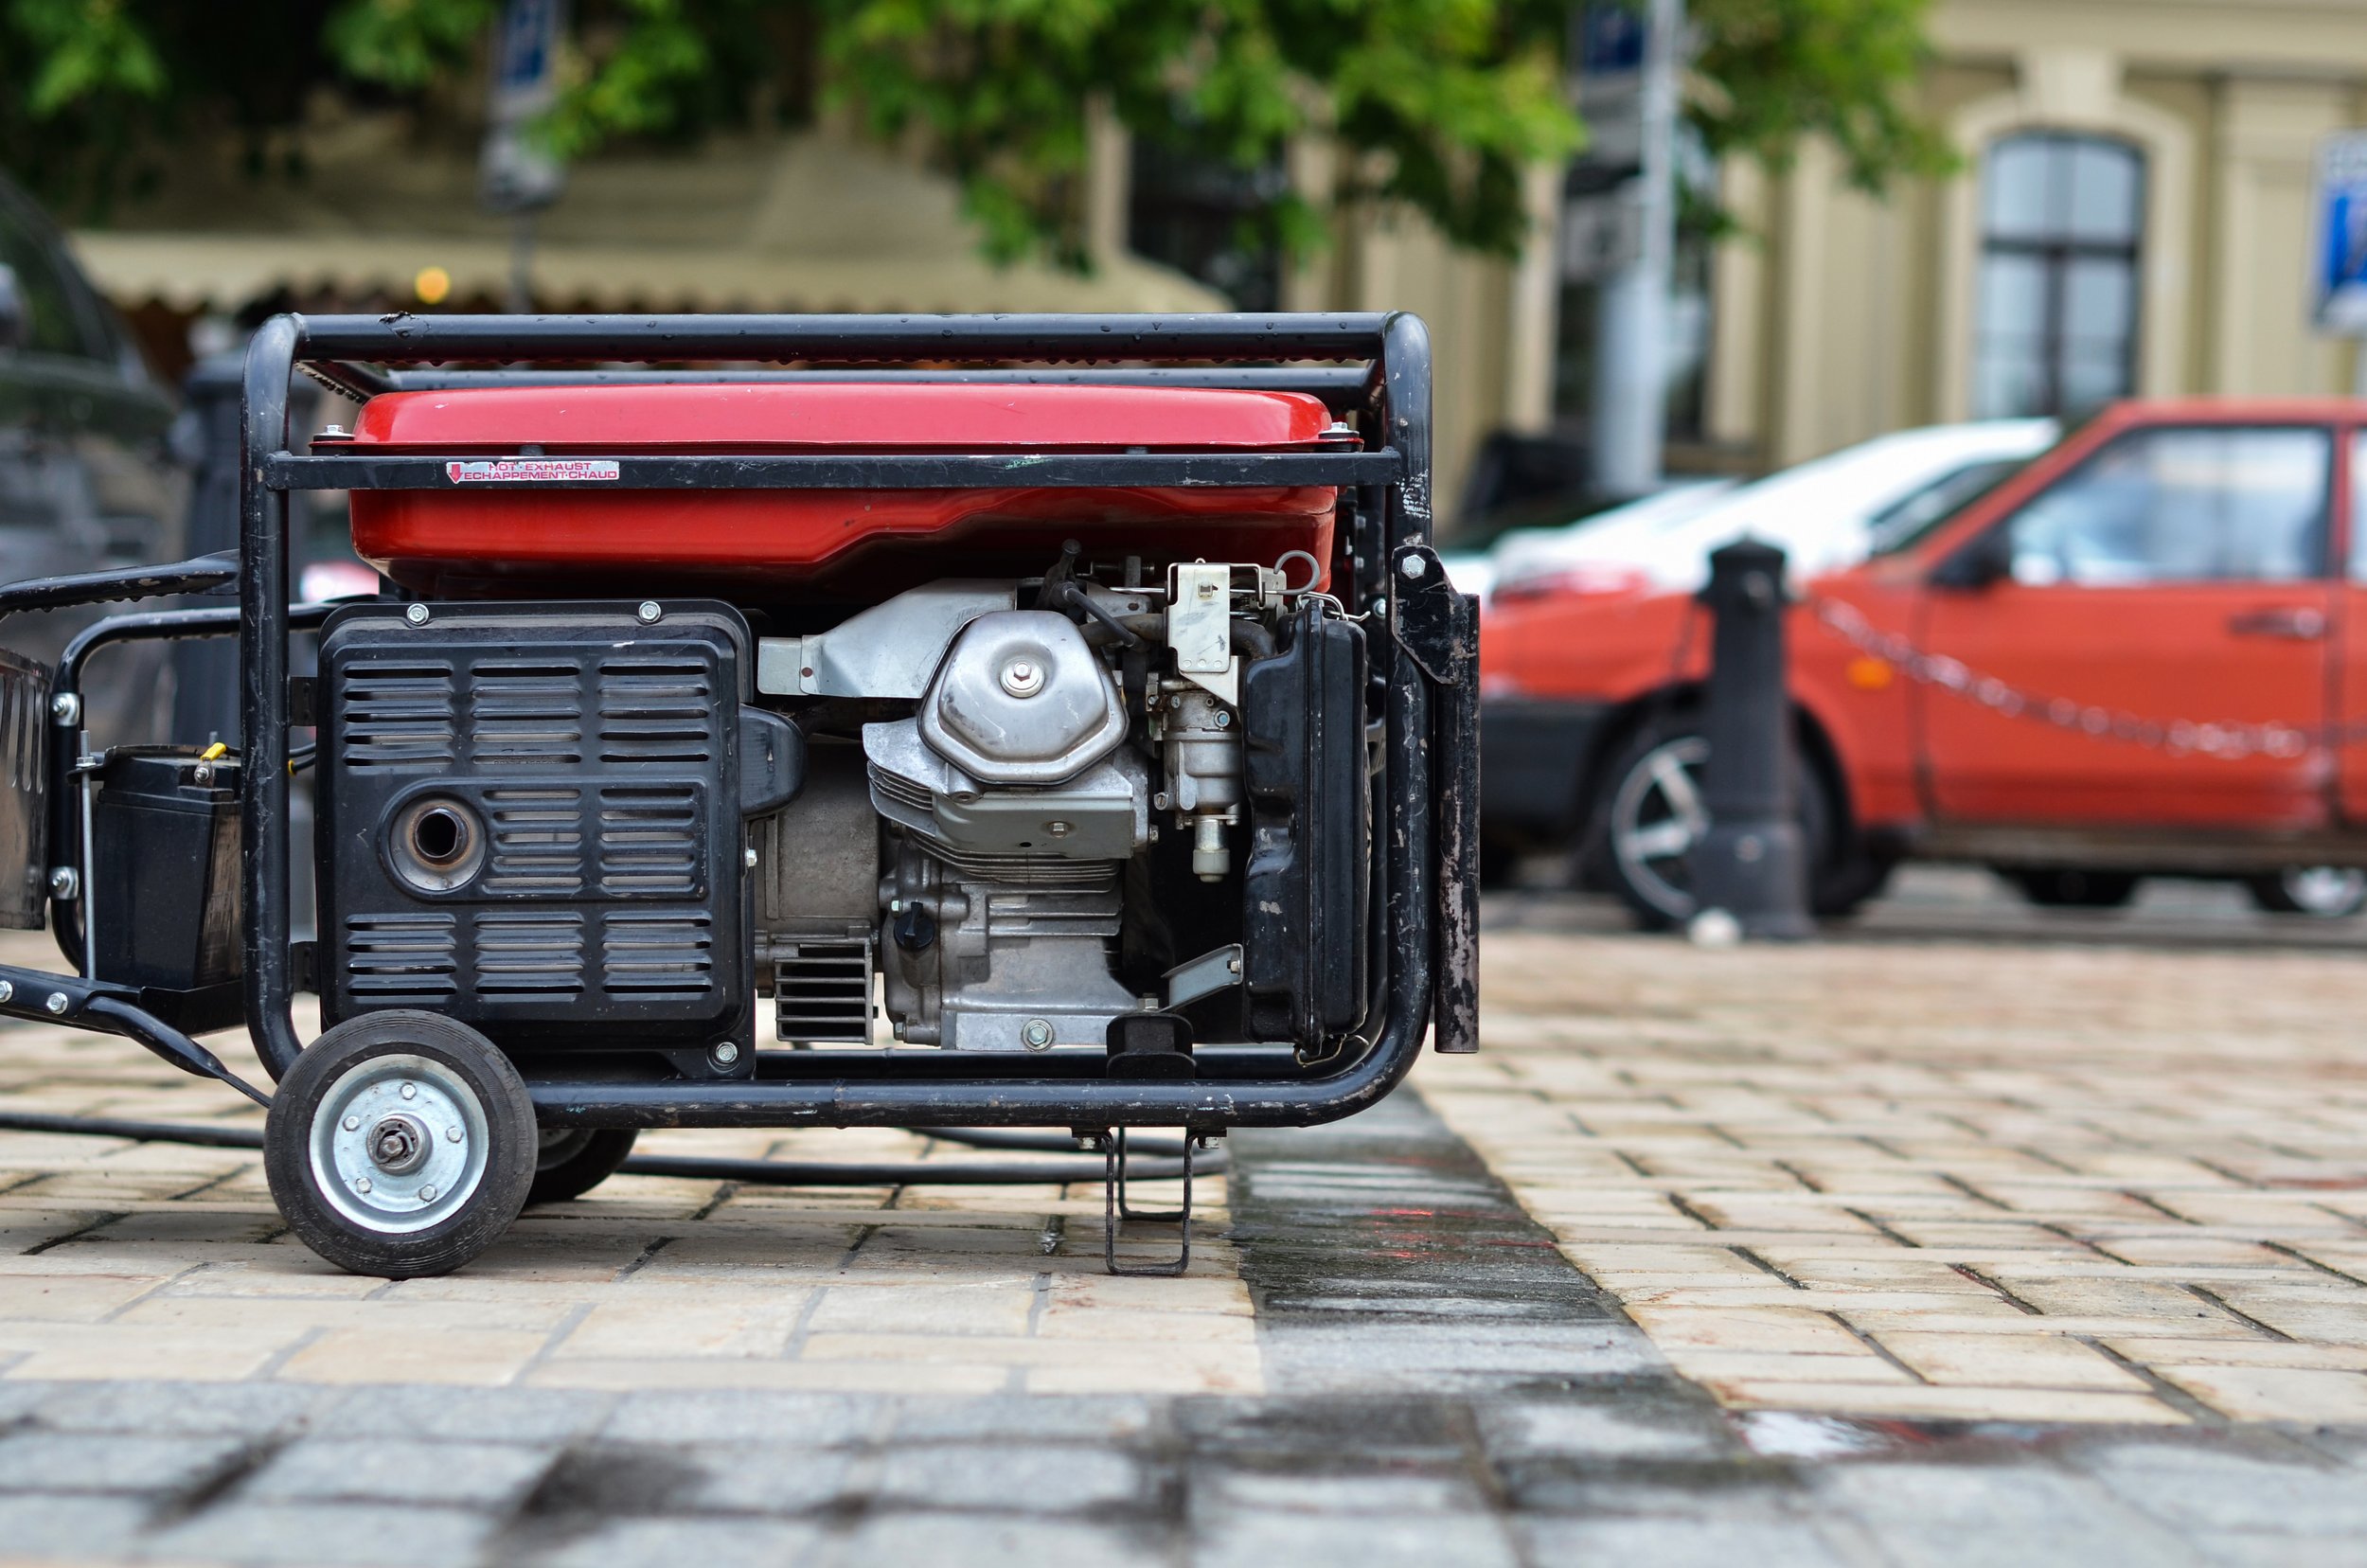 Can a Portable Generator Charge an Electric Car